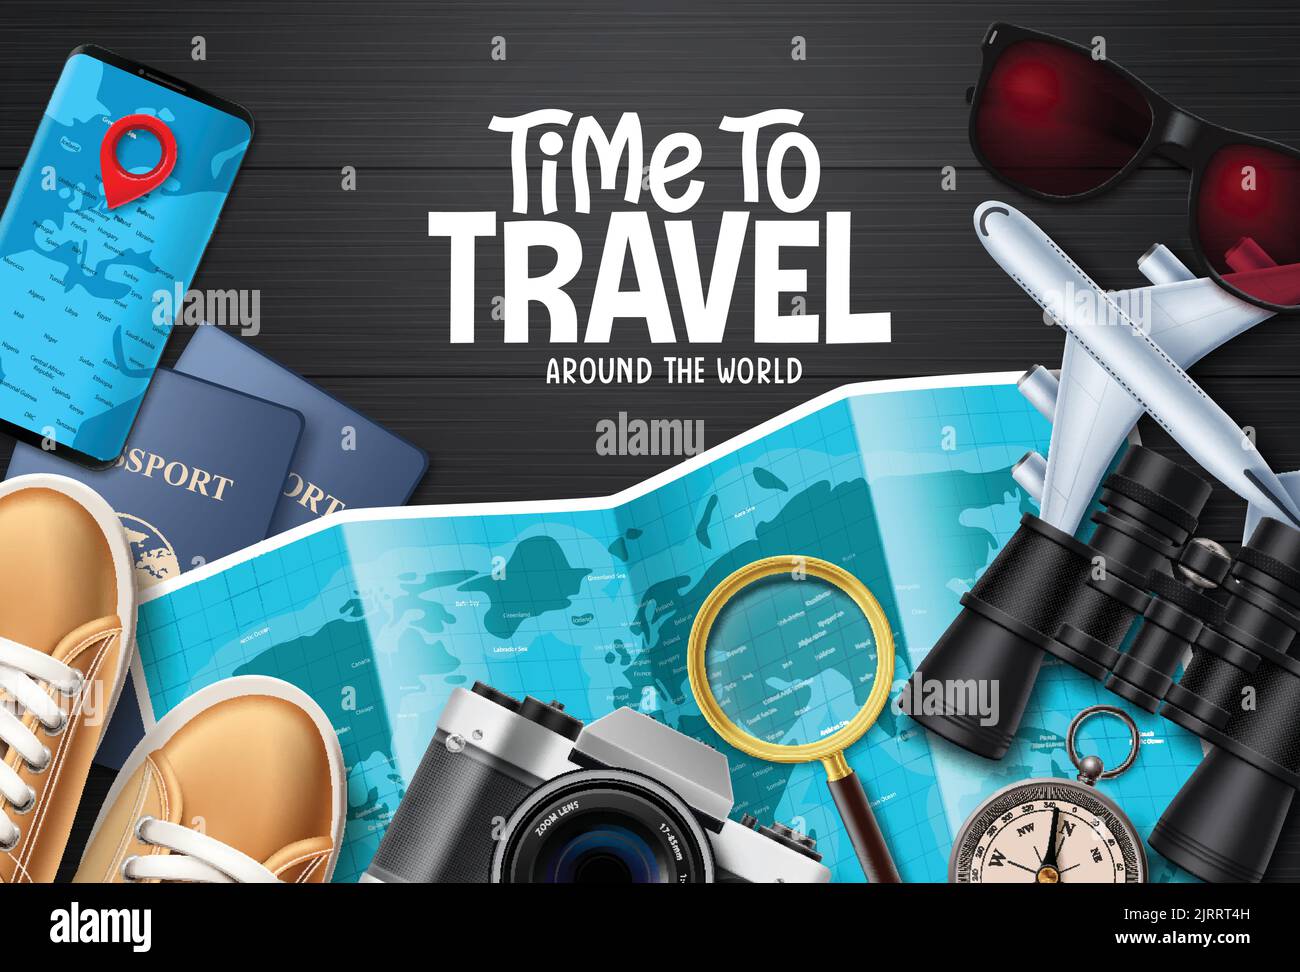 Travel time vector background design. Time to travel around the world text in wooden space with travelers elements for fun and enjoy international. Stock Vector